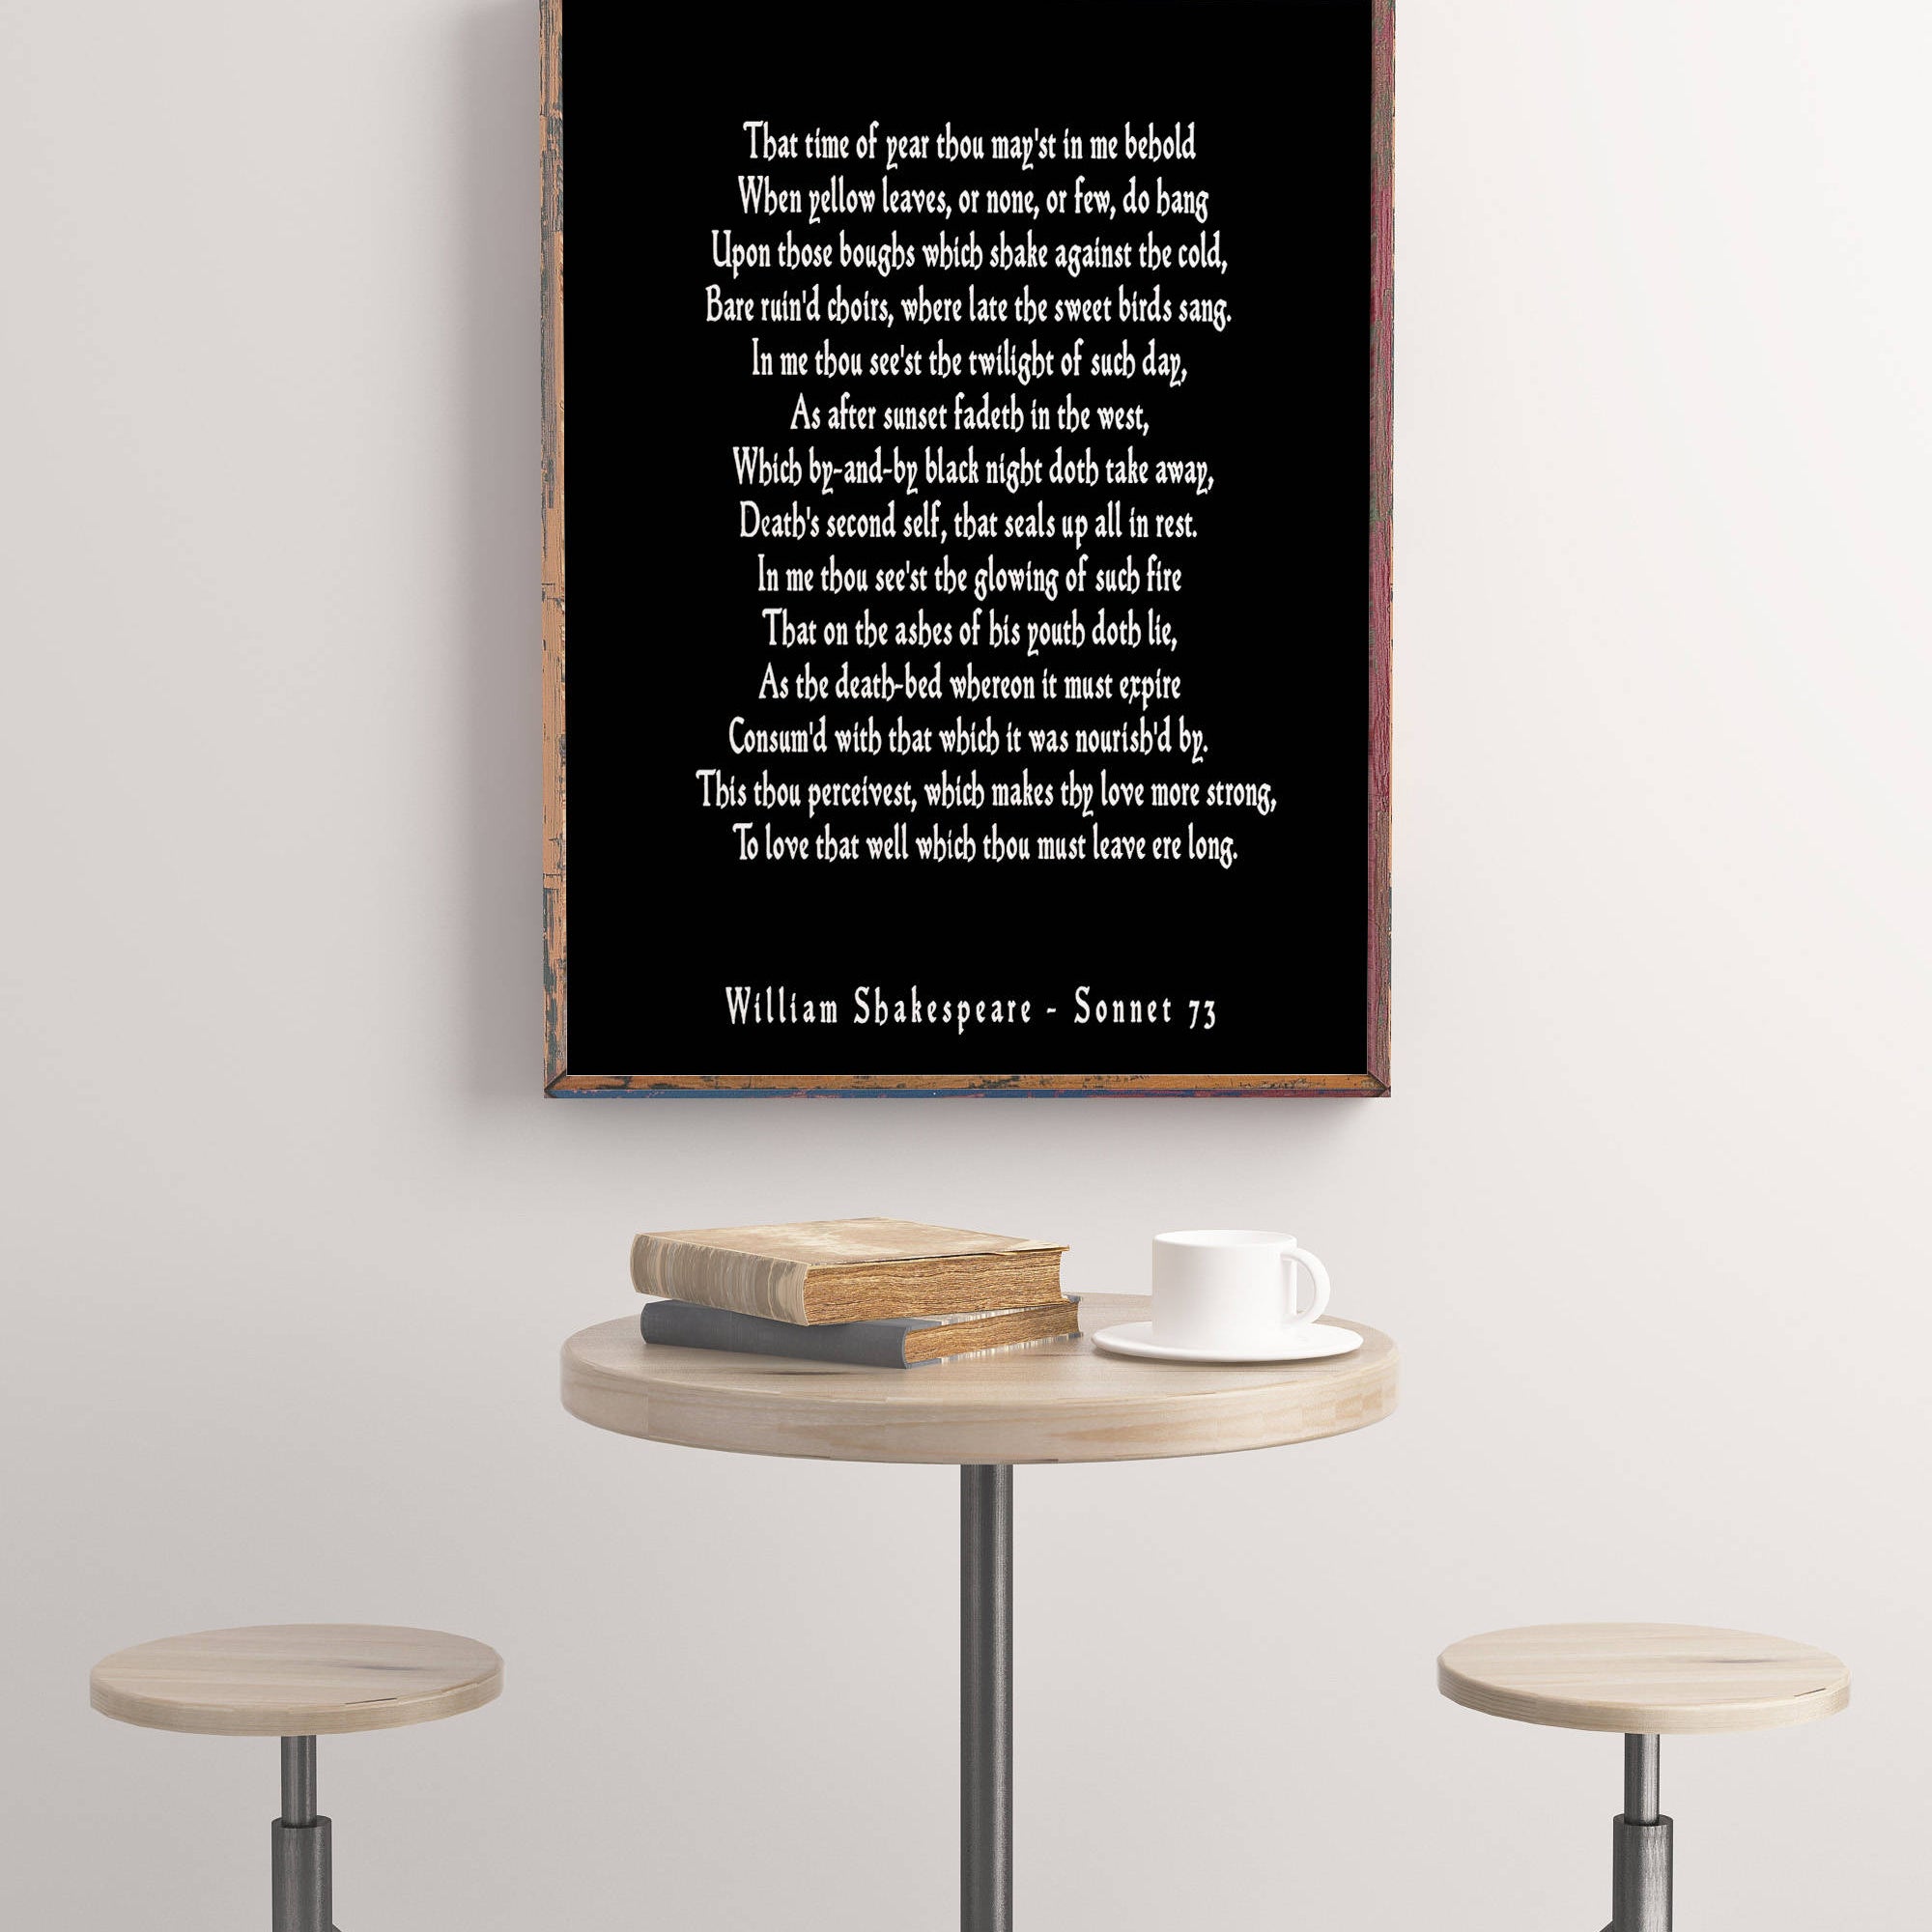 Sonnet 73 Shakespeare Love Poem, That Time Of Year Thou Mayst In Me Behold Shakespeare Wall Art for Bedroom Decor